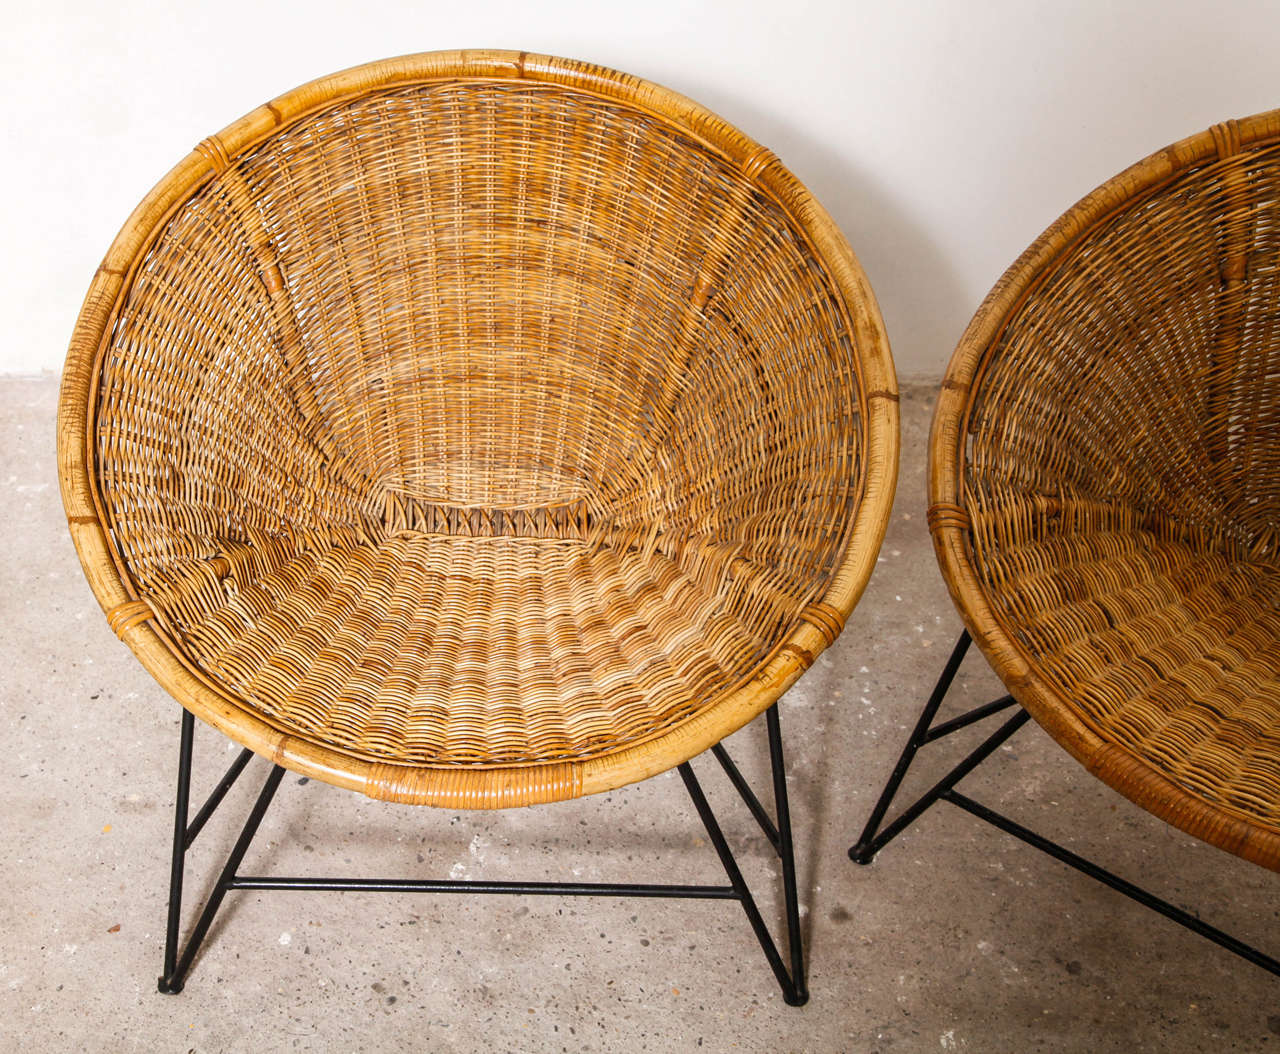 Mid-20th Century Rare Iconic Rattan Chairs Designed by Dirk Van Sliedrecht for Rohe Noordwolde